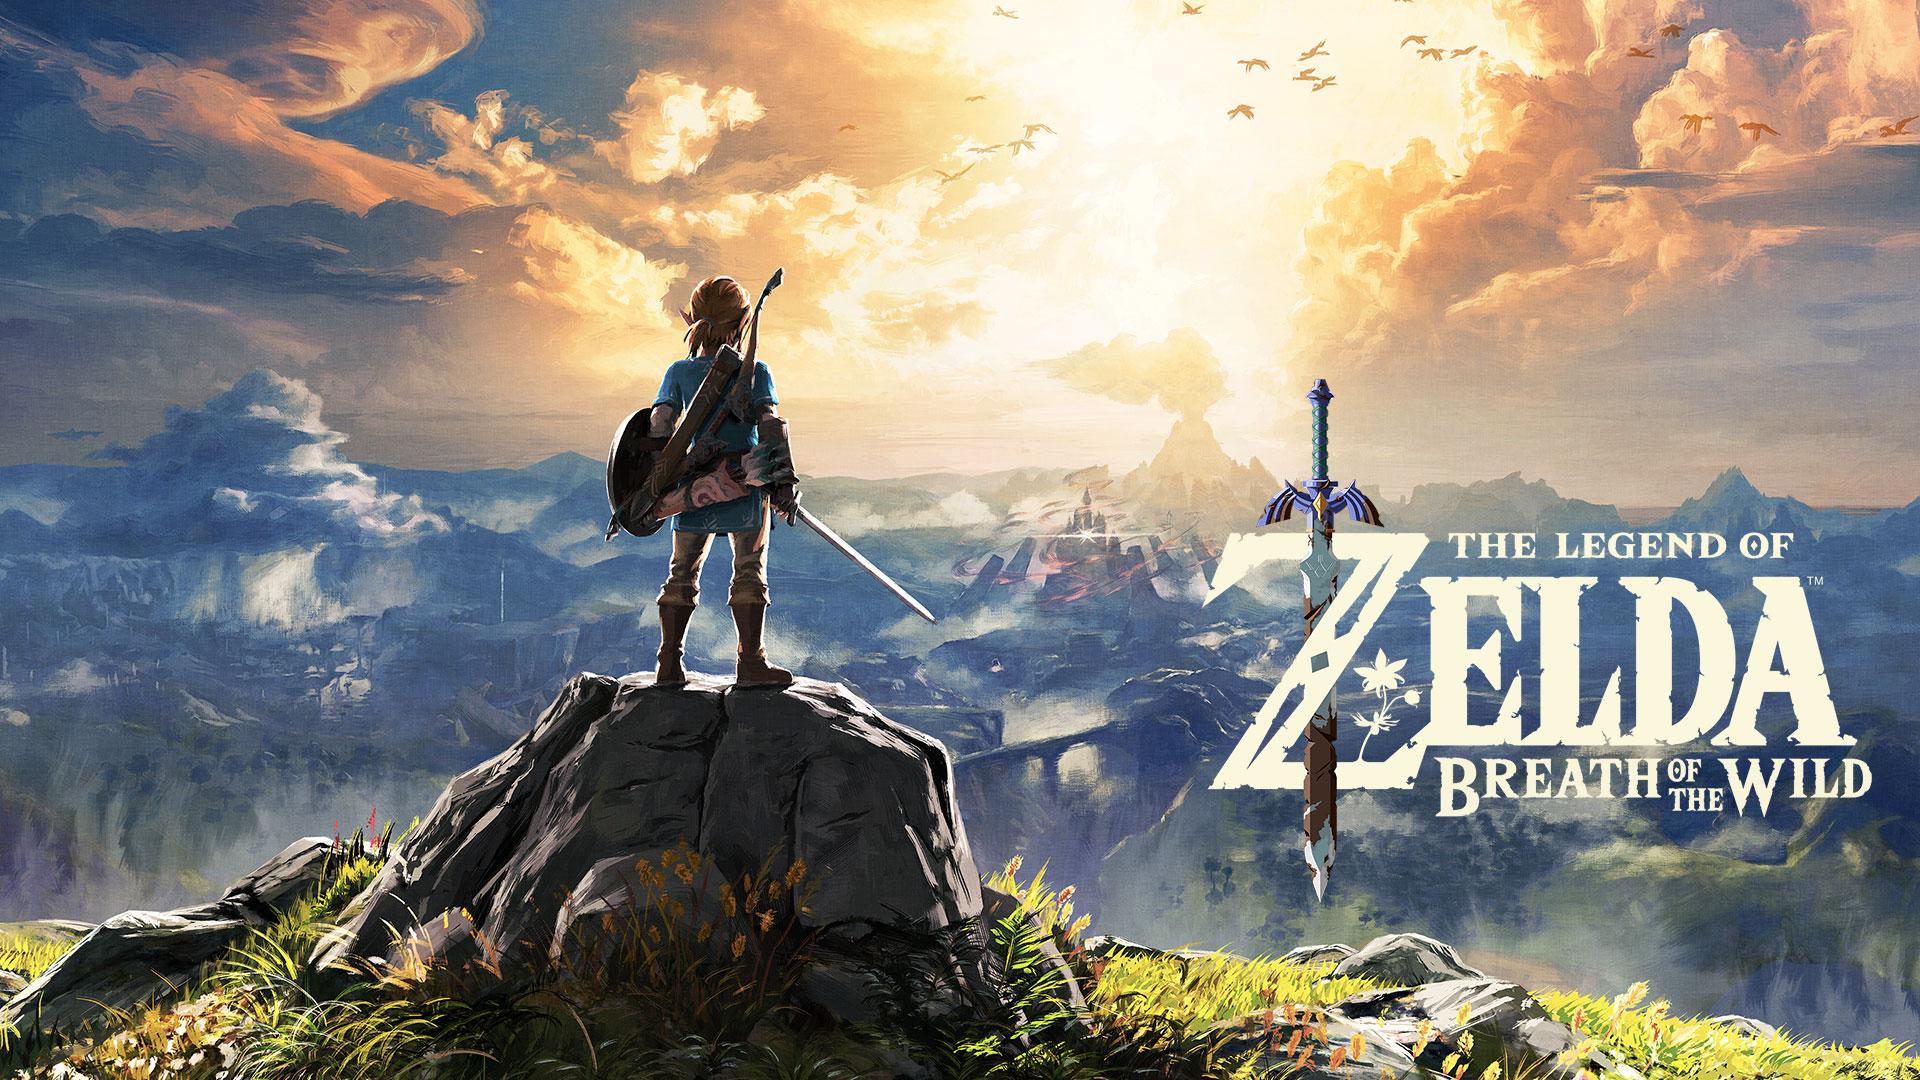 breath of the wild for beginners download free